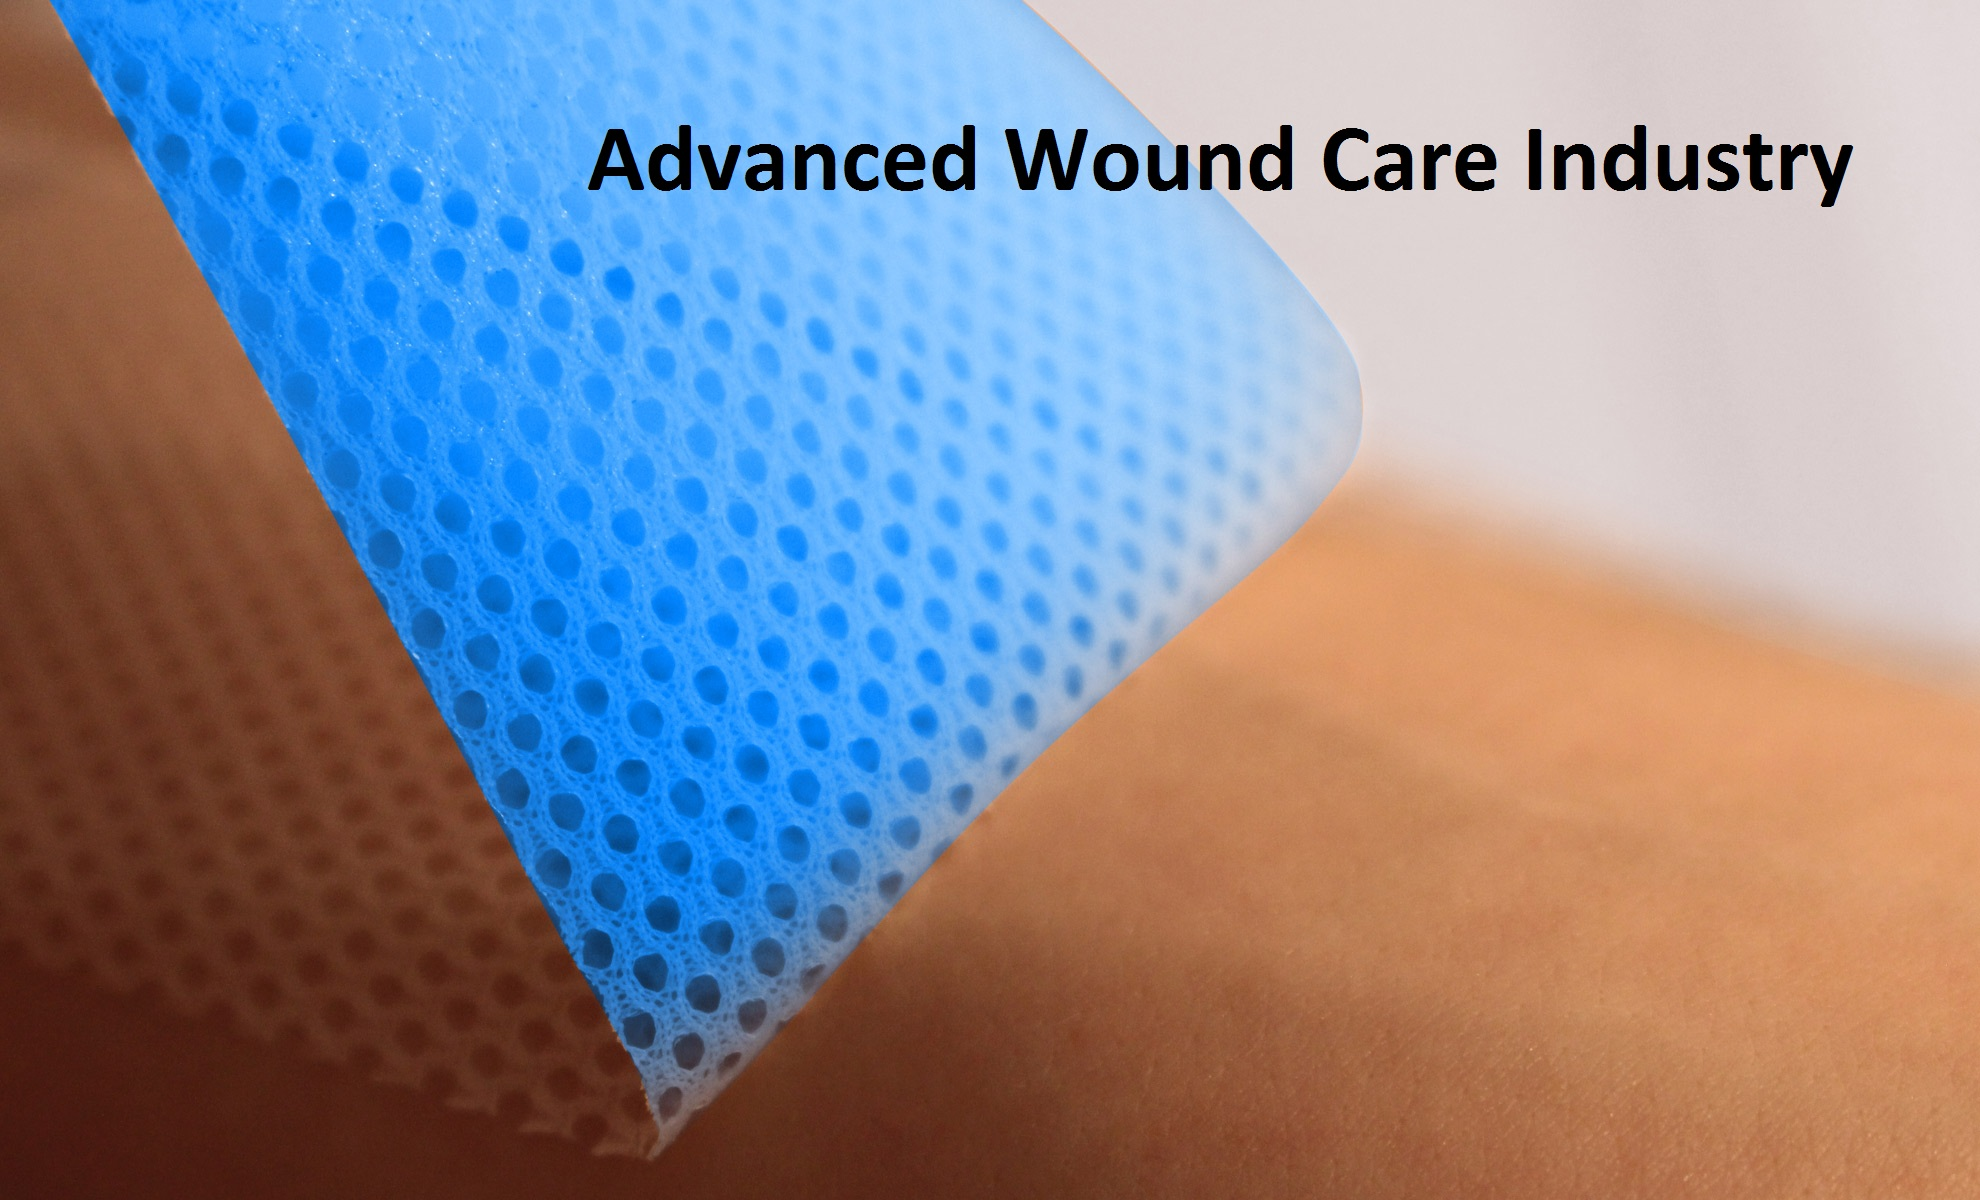  Advanced Wound Care And Closure Market Growth, Business Scope and Global Demand 2019 to 2025 : Smith and Nephew, Kinetic Concepts, 3M, BSN medical